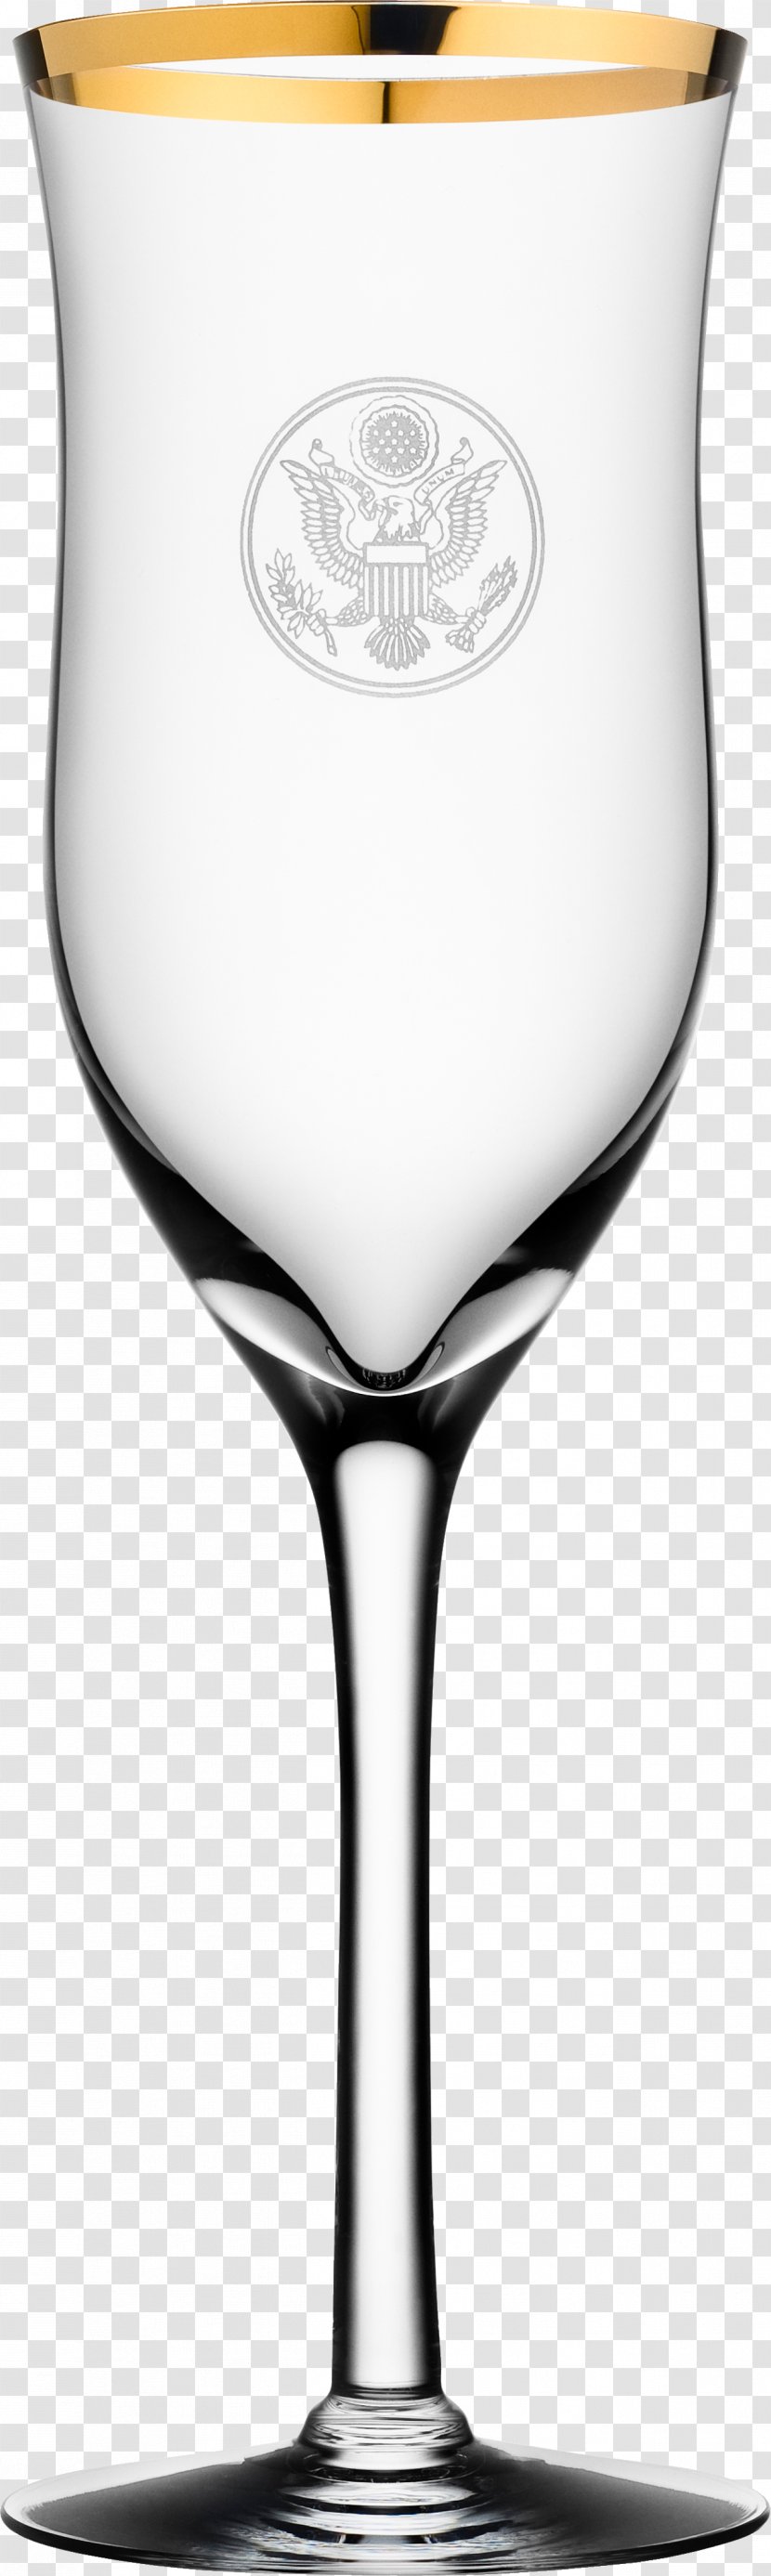 Wine Glass Champagne - Tableglass - Cup Transparent PNG